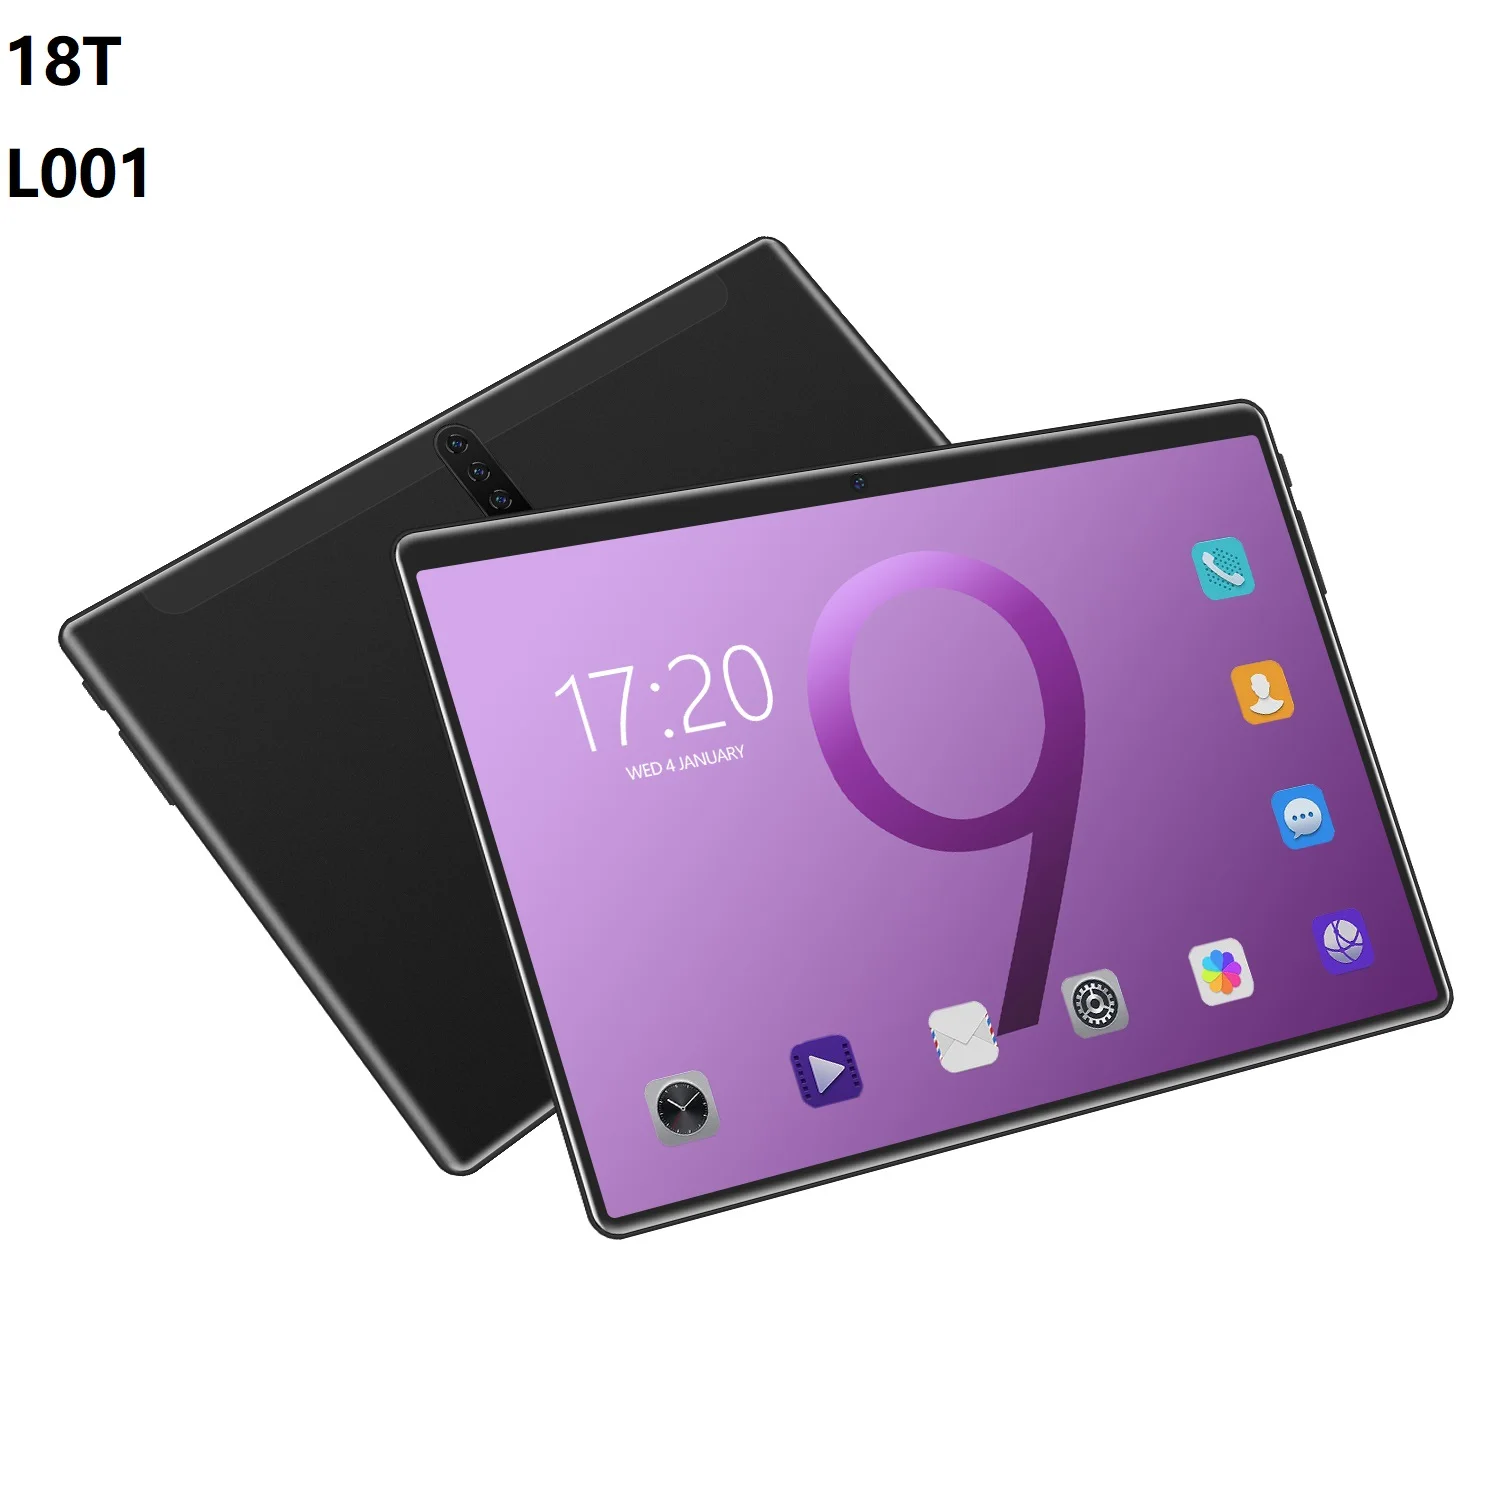 cheap android tablet Tablet 2022 New Product 10.1inch Game Painting Full Screen Eye Protection WIFI 8800mAh 8MP+16MP GPS Google Store Cheap Pocket PC newest samsung tablet Tablets